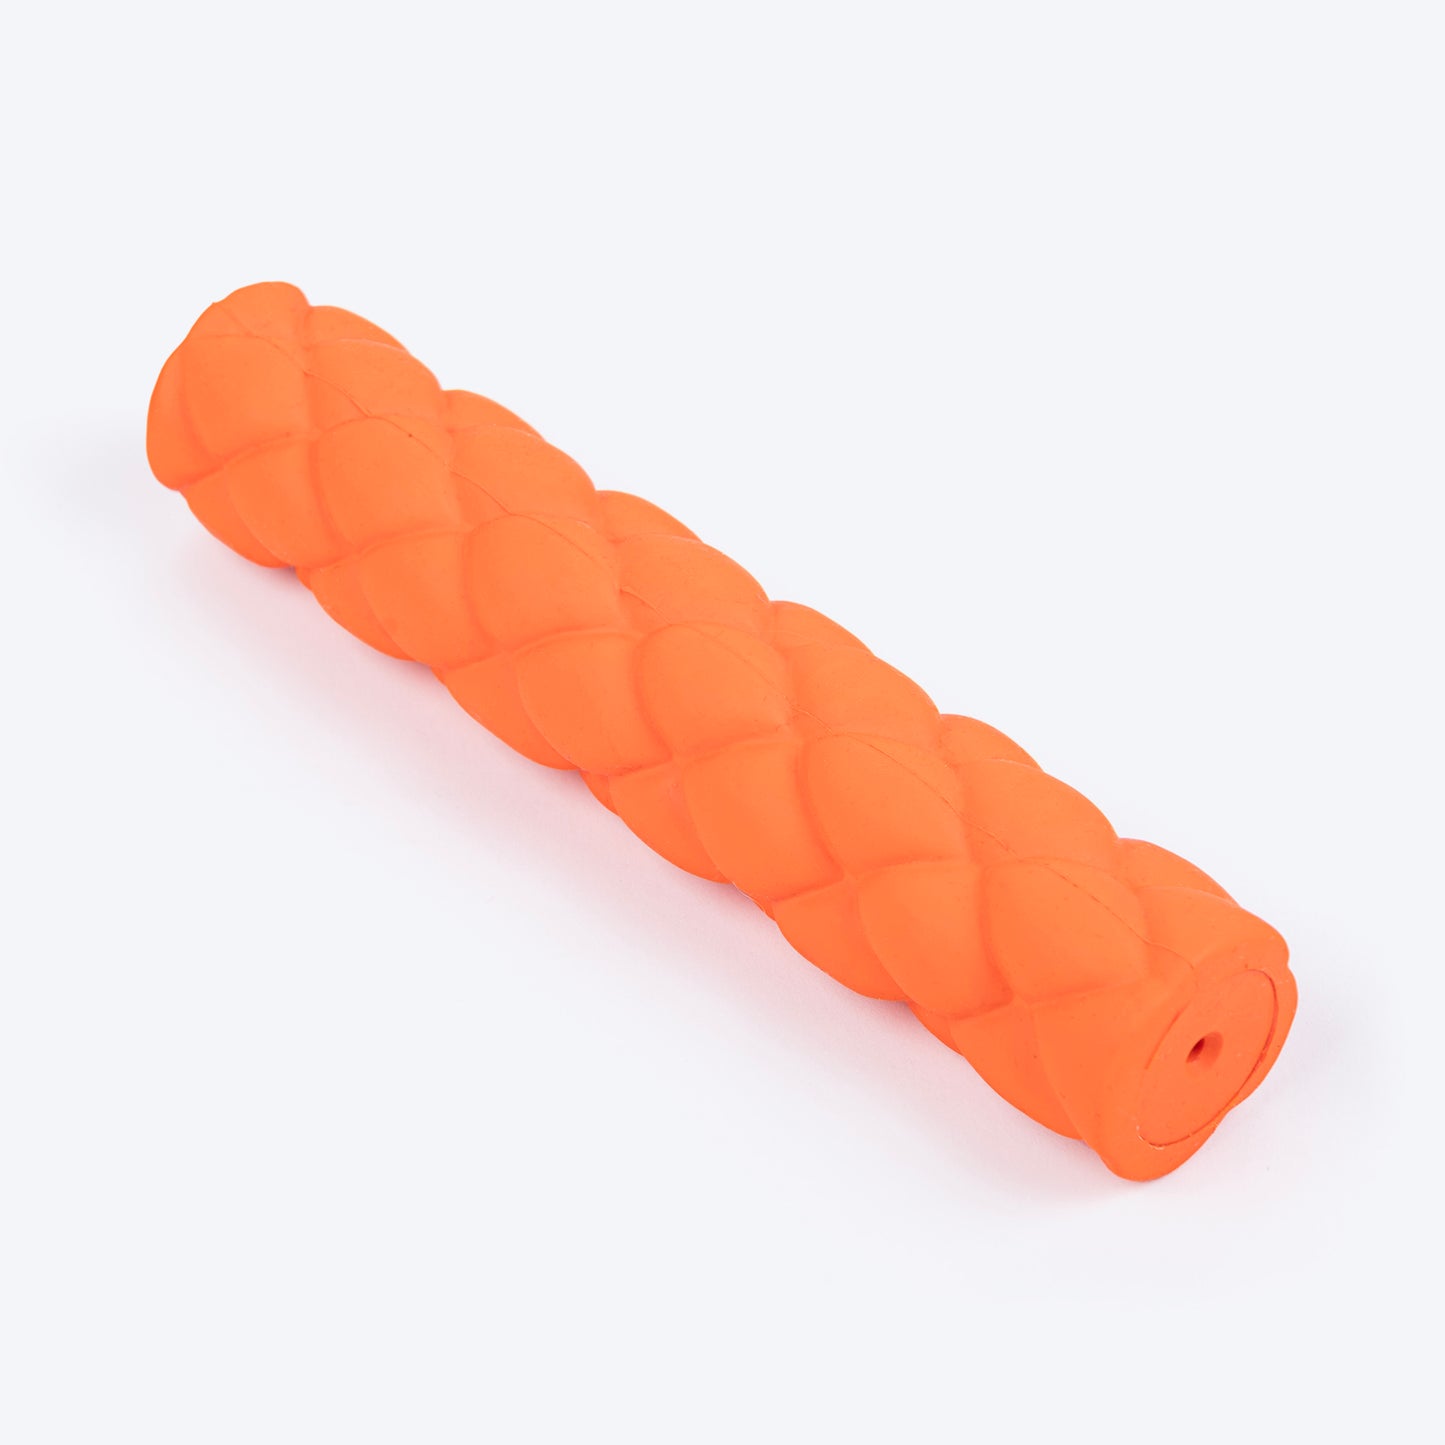 HUFT Twist-n-Chew Toy For Dog - S - Orange - Heads Up For Tails